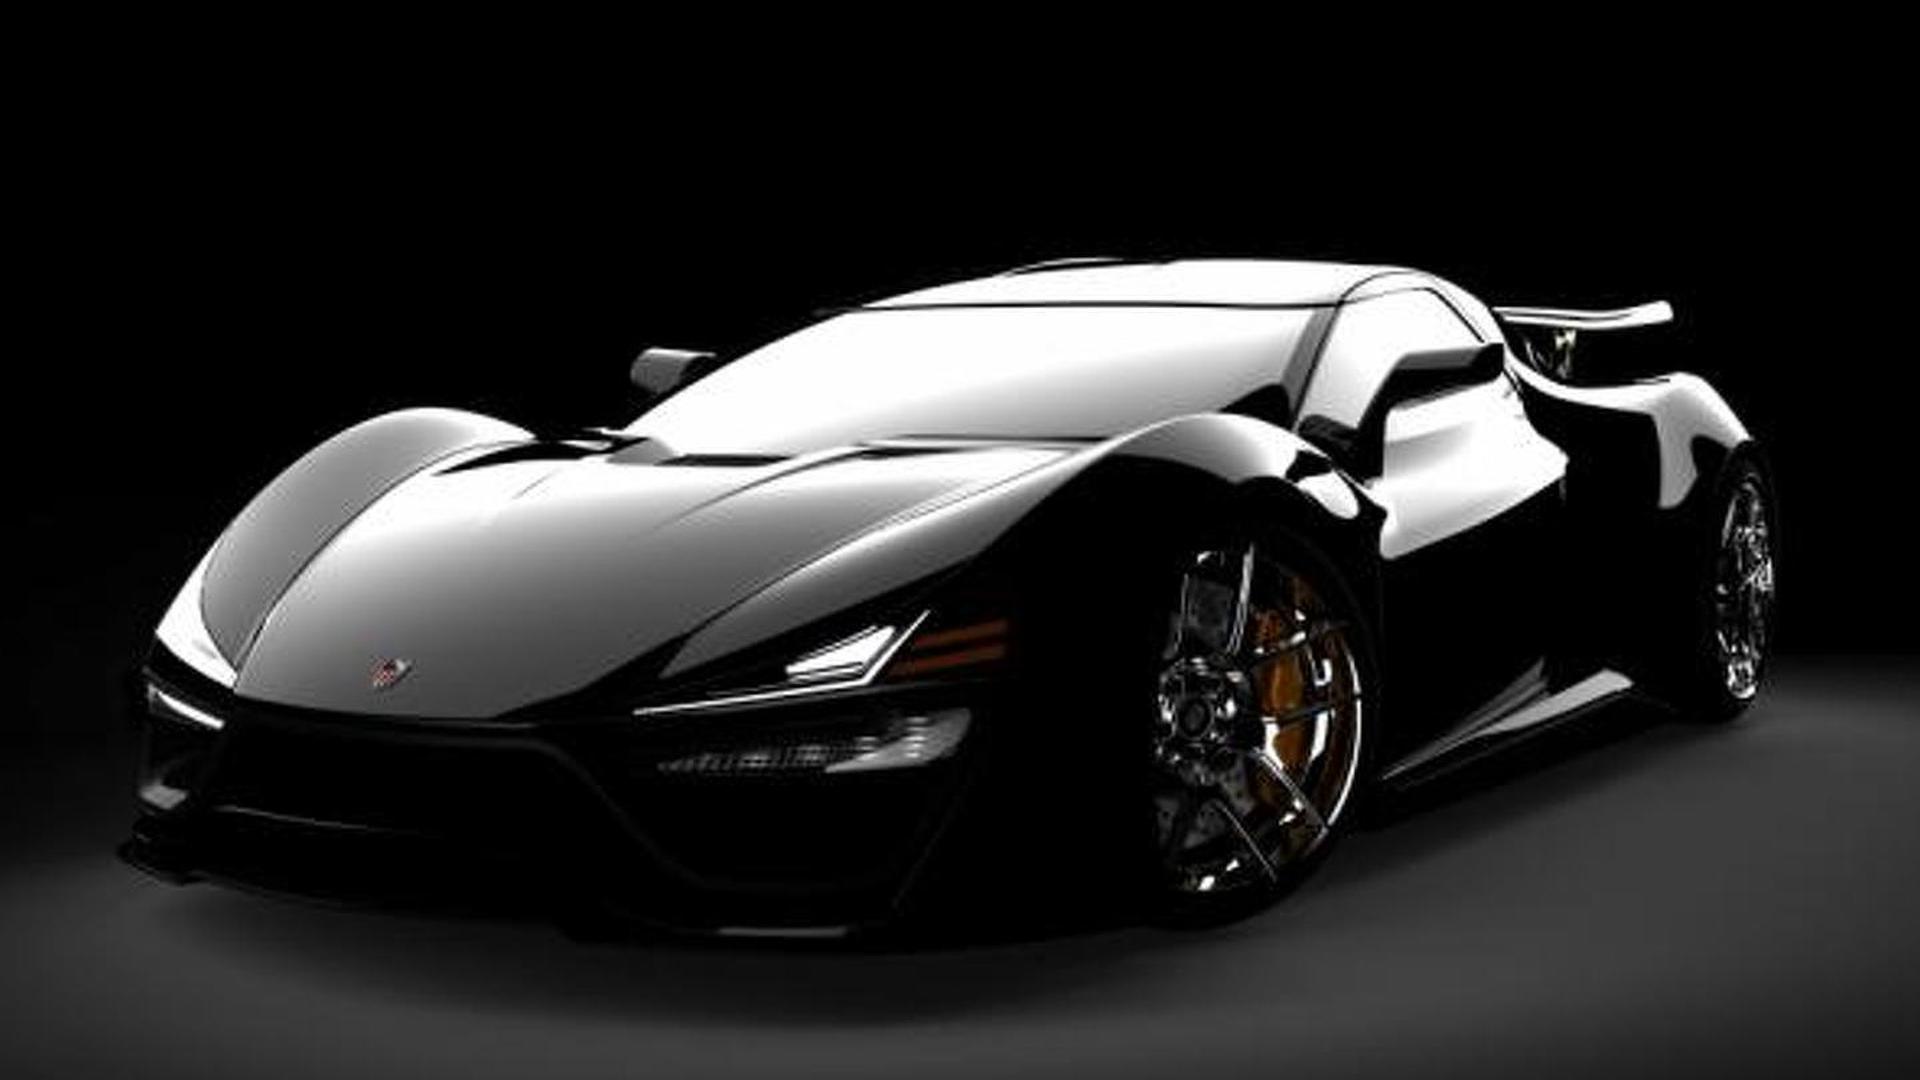 Trion Nemesis detailed in 19 photo, goes on sale in 2016